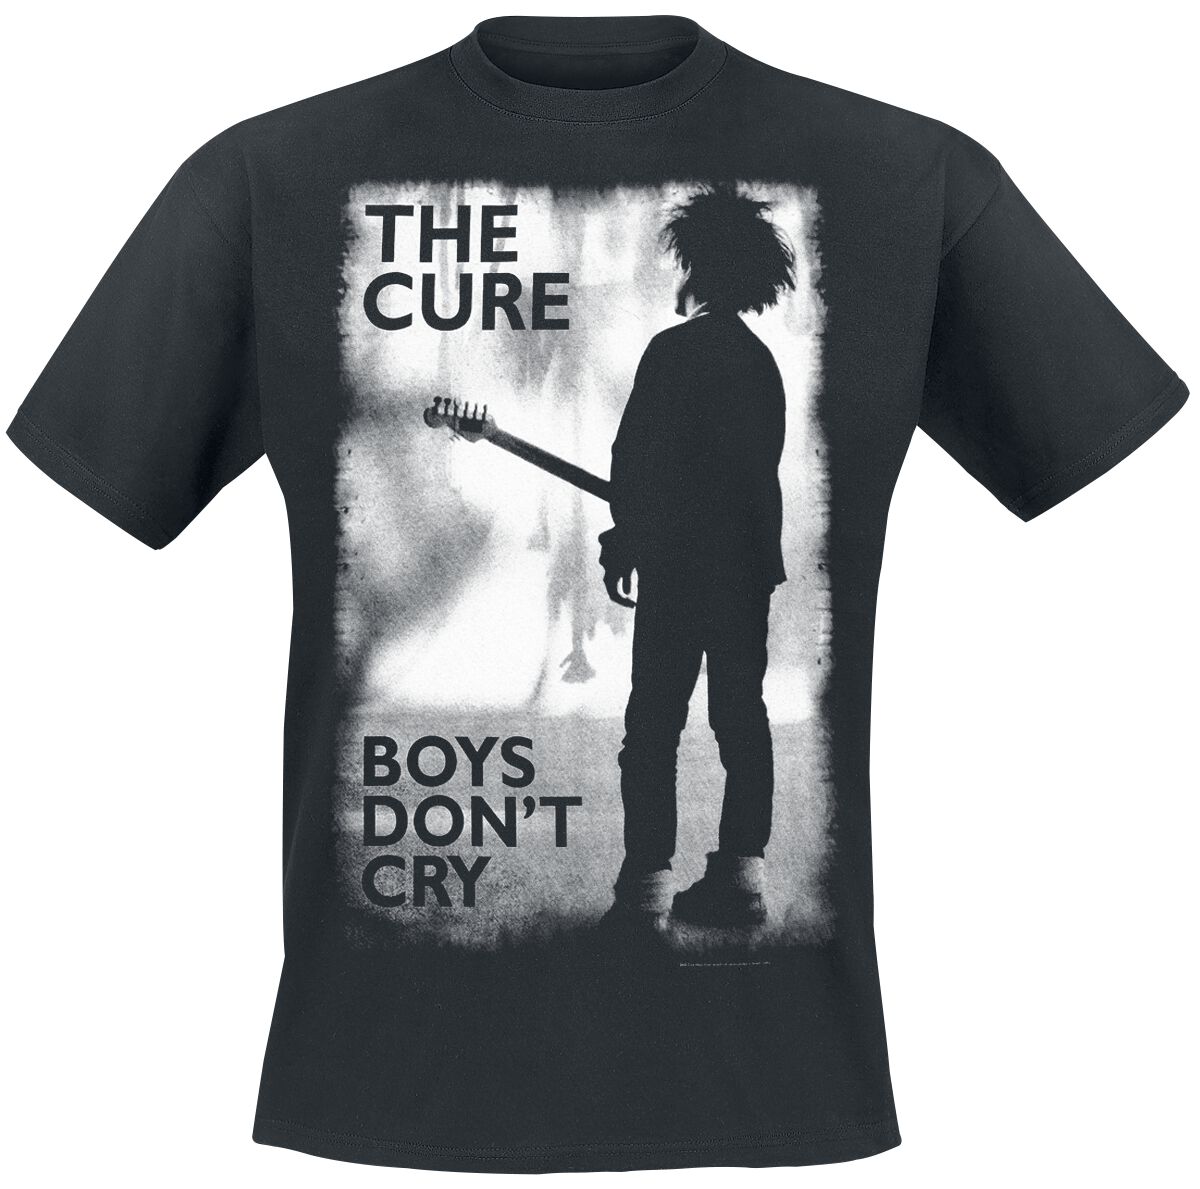 The Cure - Boys Don't Cry - T-Shirt - Uomo - nero